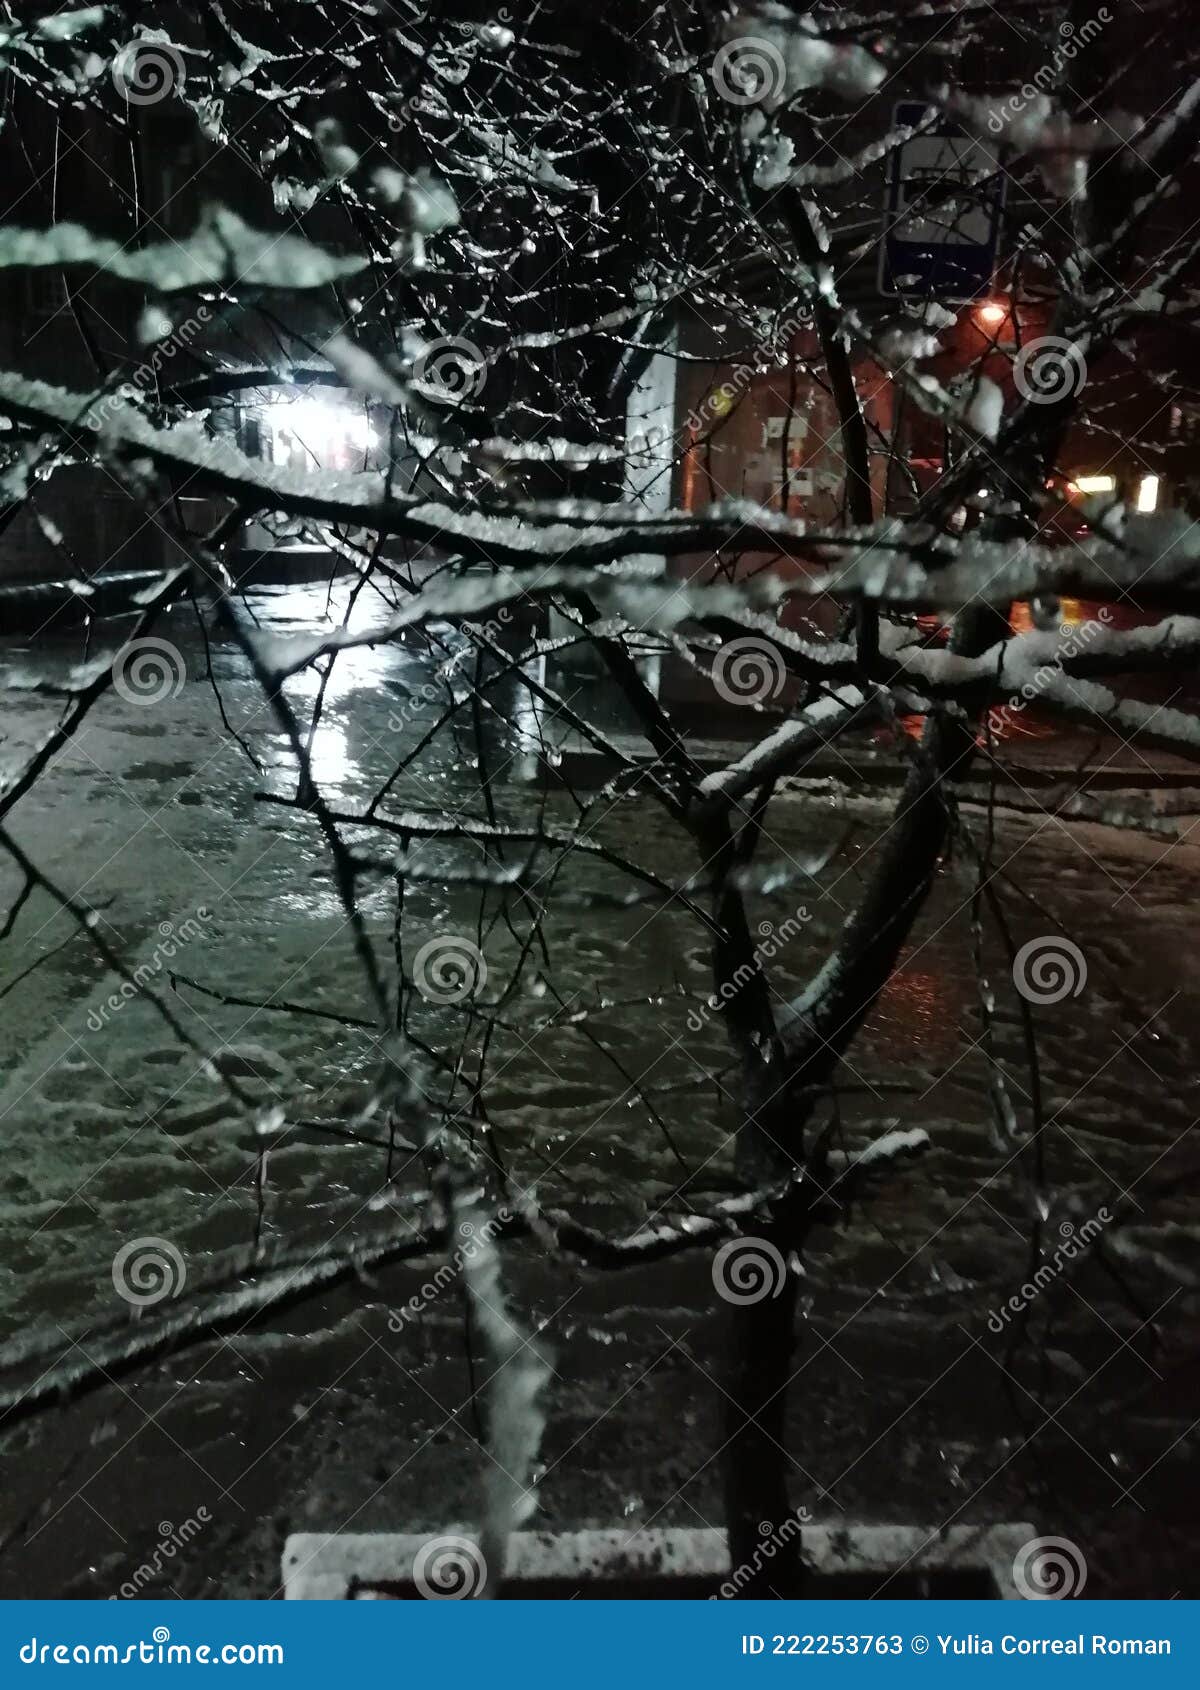 ice and water on the twigs of trees one winter night